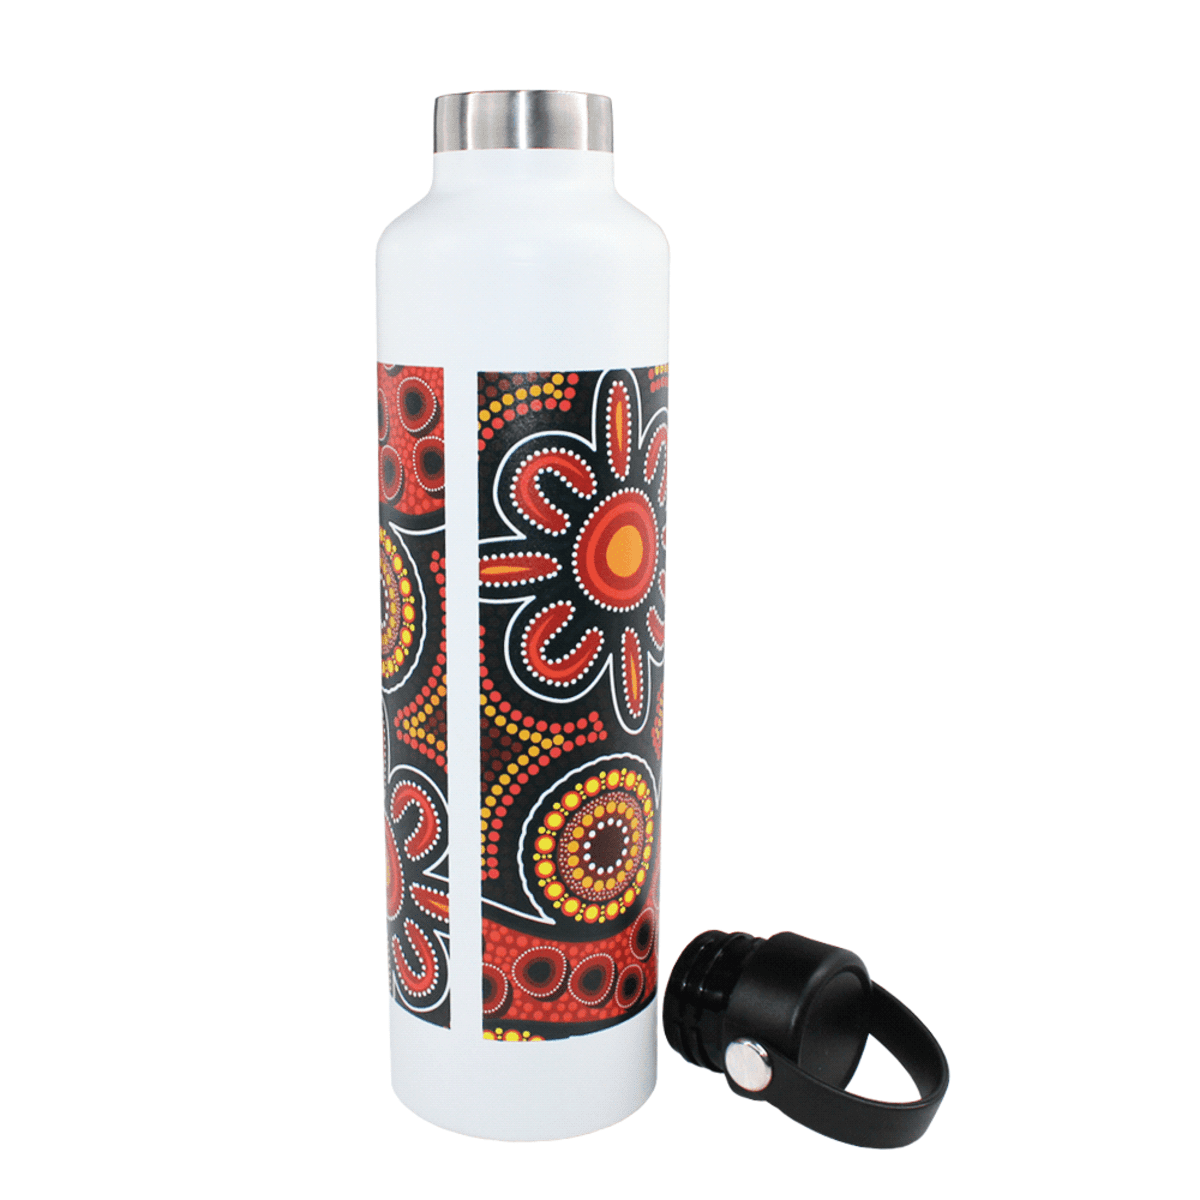 The Tank Stainless Steel Drink Bottle with Rotary Digital Print - 1L